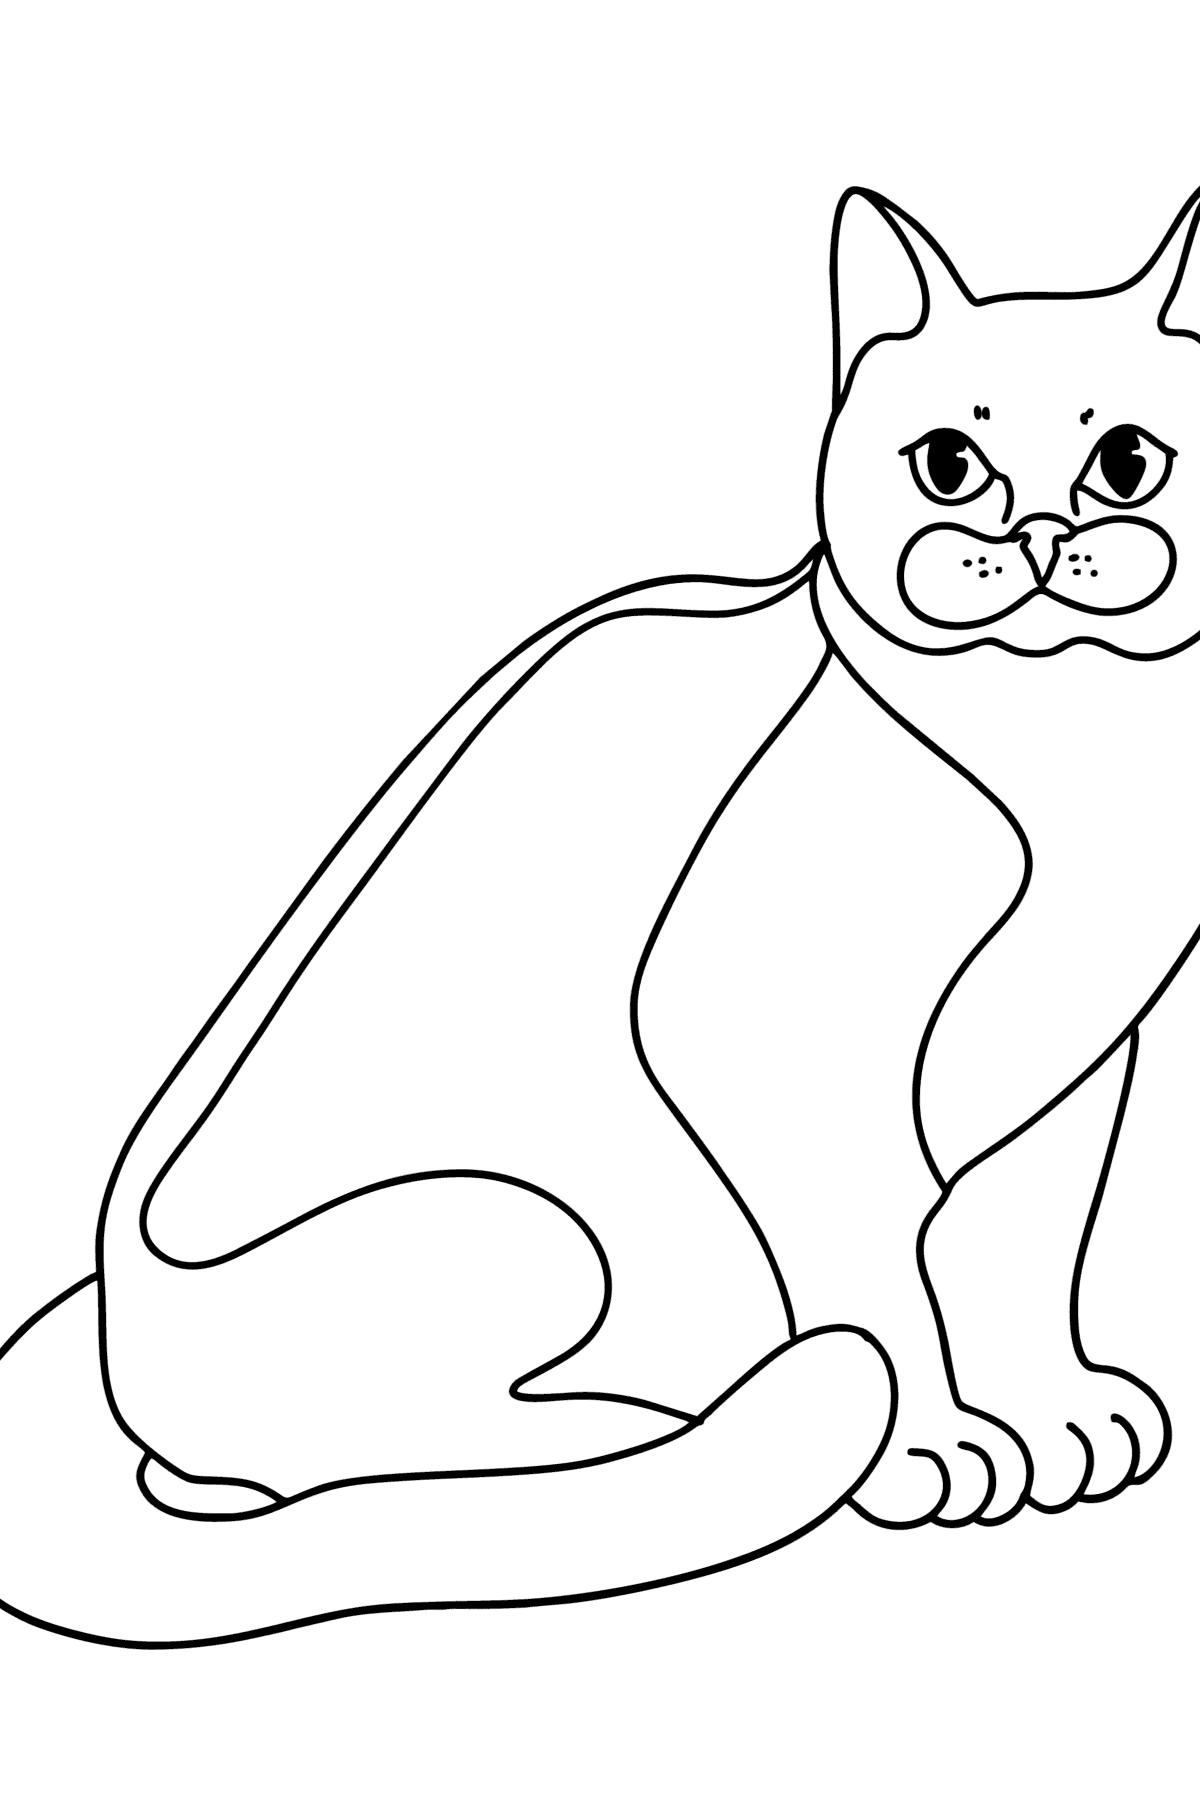 Bombay Cat coloring page - Coloring Pages for Kids